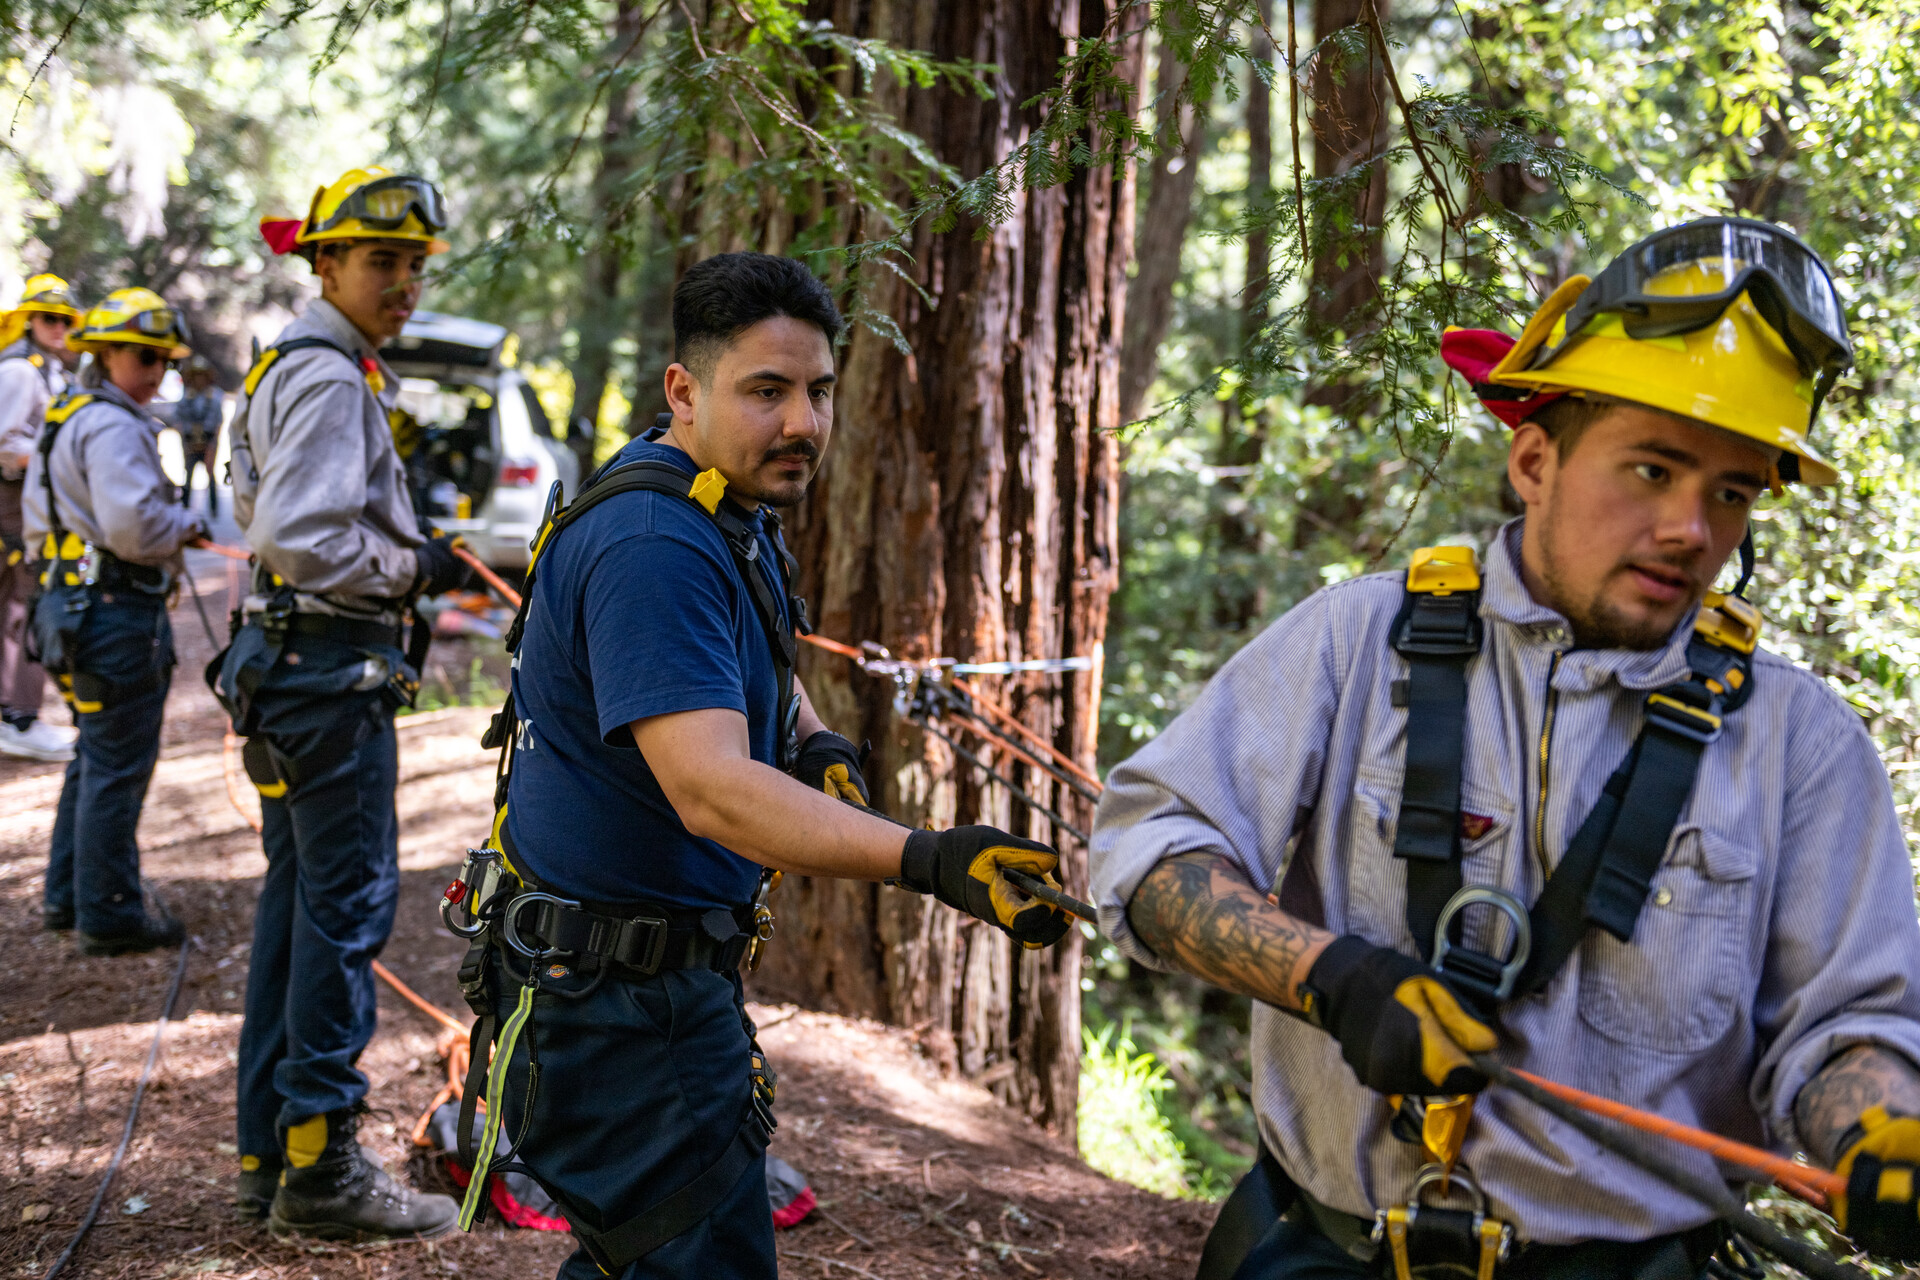 A group of trainees wearing firefighting gear hold a rope as they stand in line behind each other, all but one wearing yellow helmets and goggles, trainees are male and female of different ethnicities.